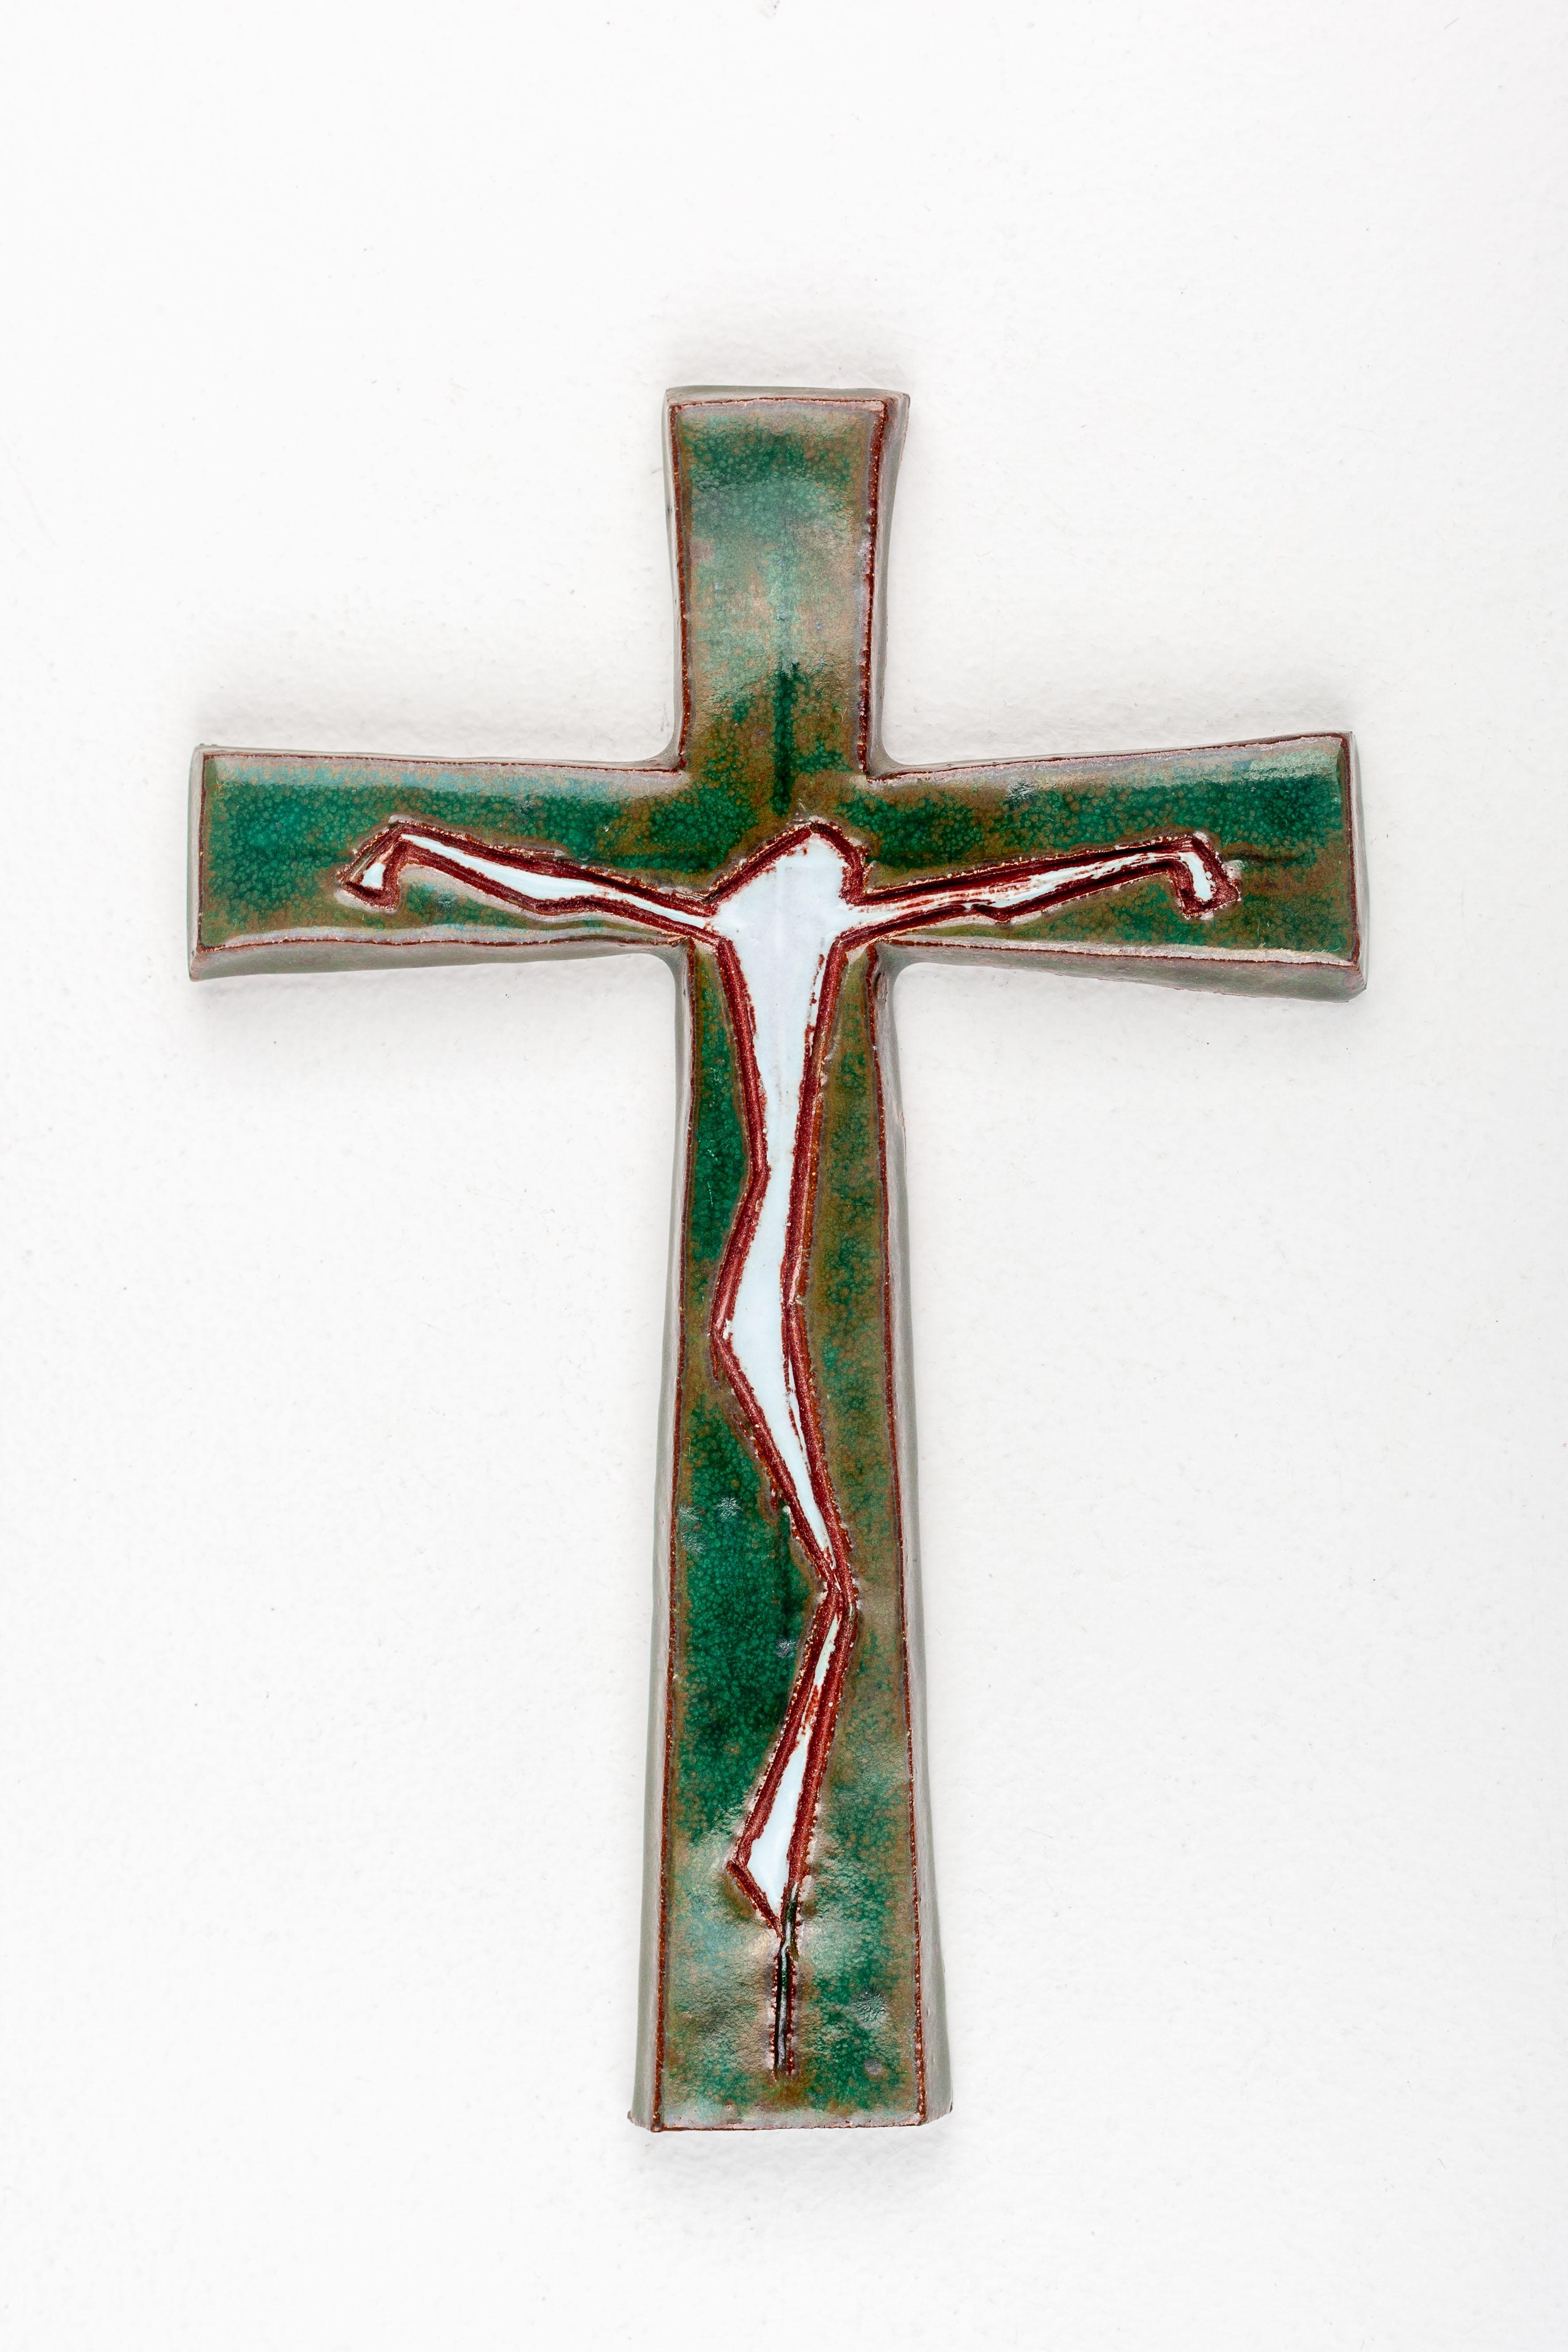 This striking mid-century modern ceramic wall cross is a remarkable example of European studio pottery from the 20th century. The piece is a harmonious fusion of spiritual symbolism and modernist aesthetic. The figure of Christ is abstracted to